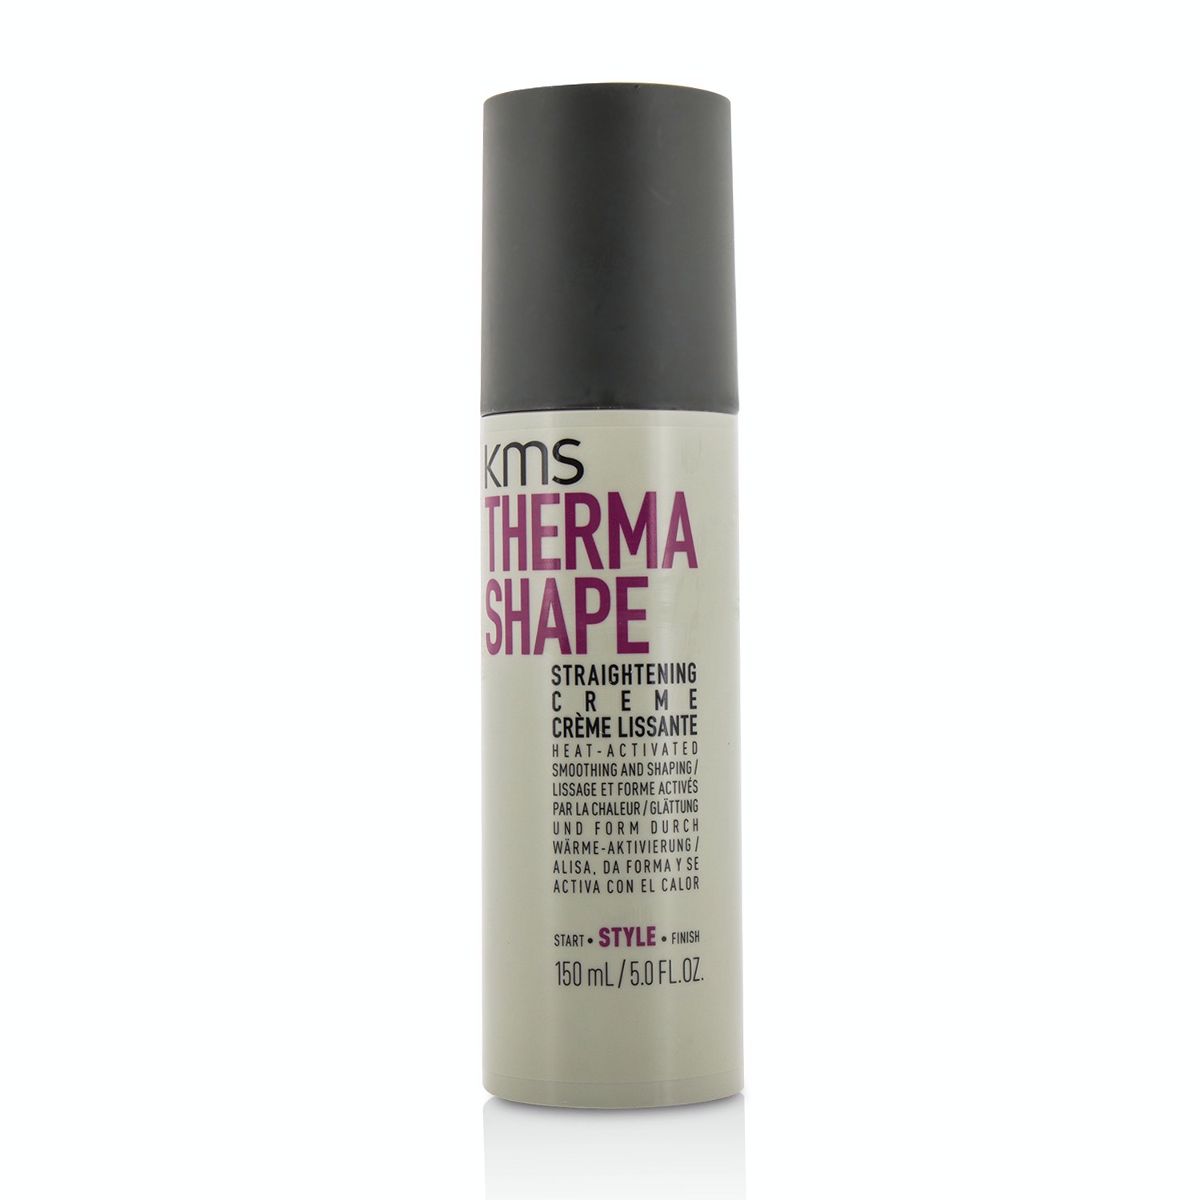 Therma Shape Straightening Creme (Heat-Activated Smoothing and Shaping) KMS California Image